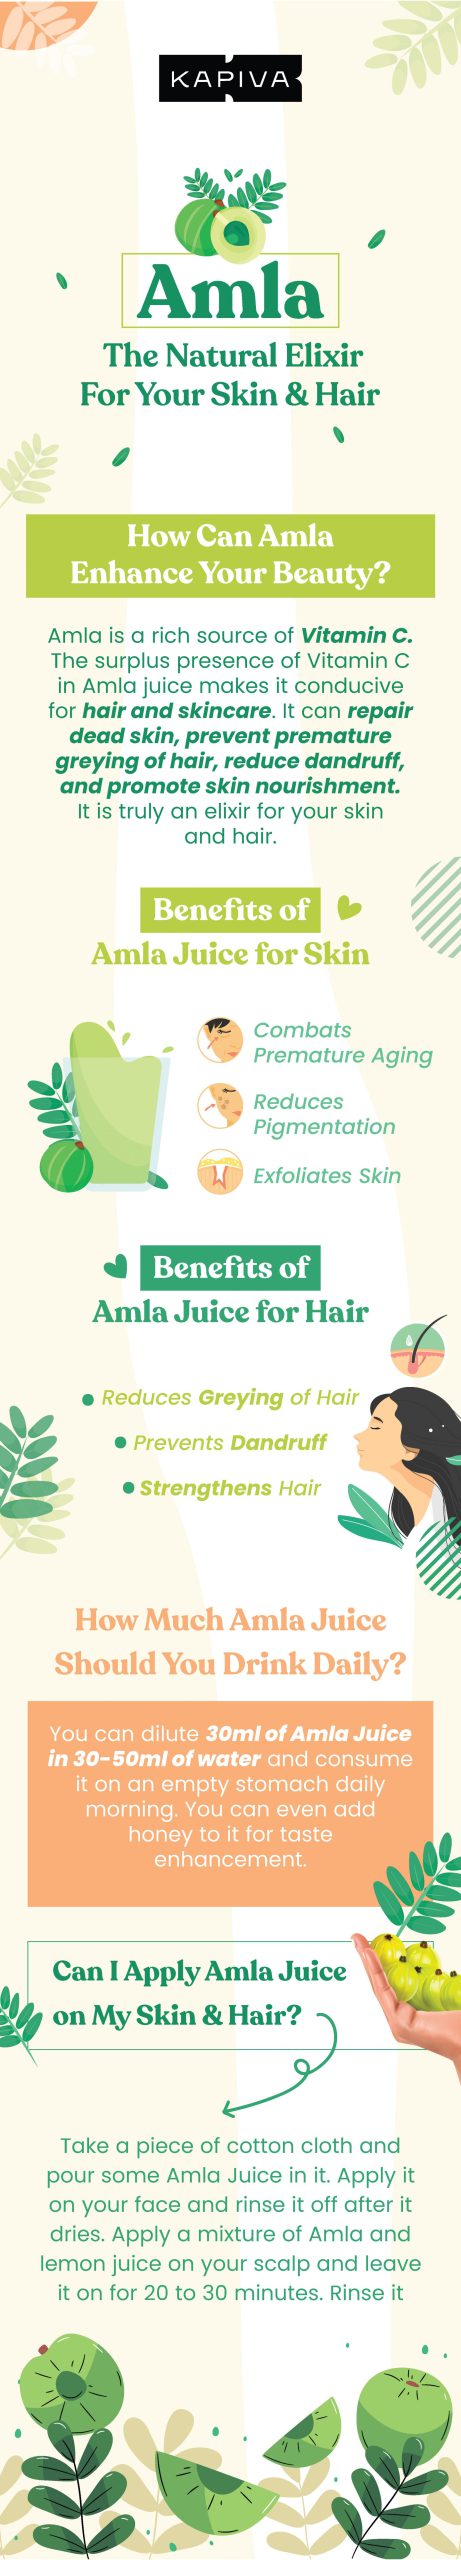 Dabur Amla hair oil - does it stop premature greying of hair? (Product  review) | TheHealthSite.com